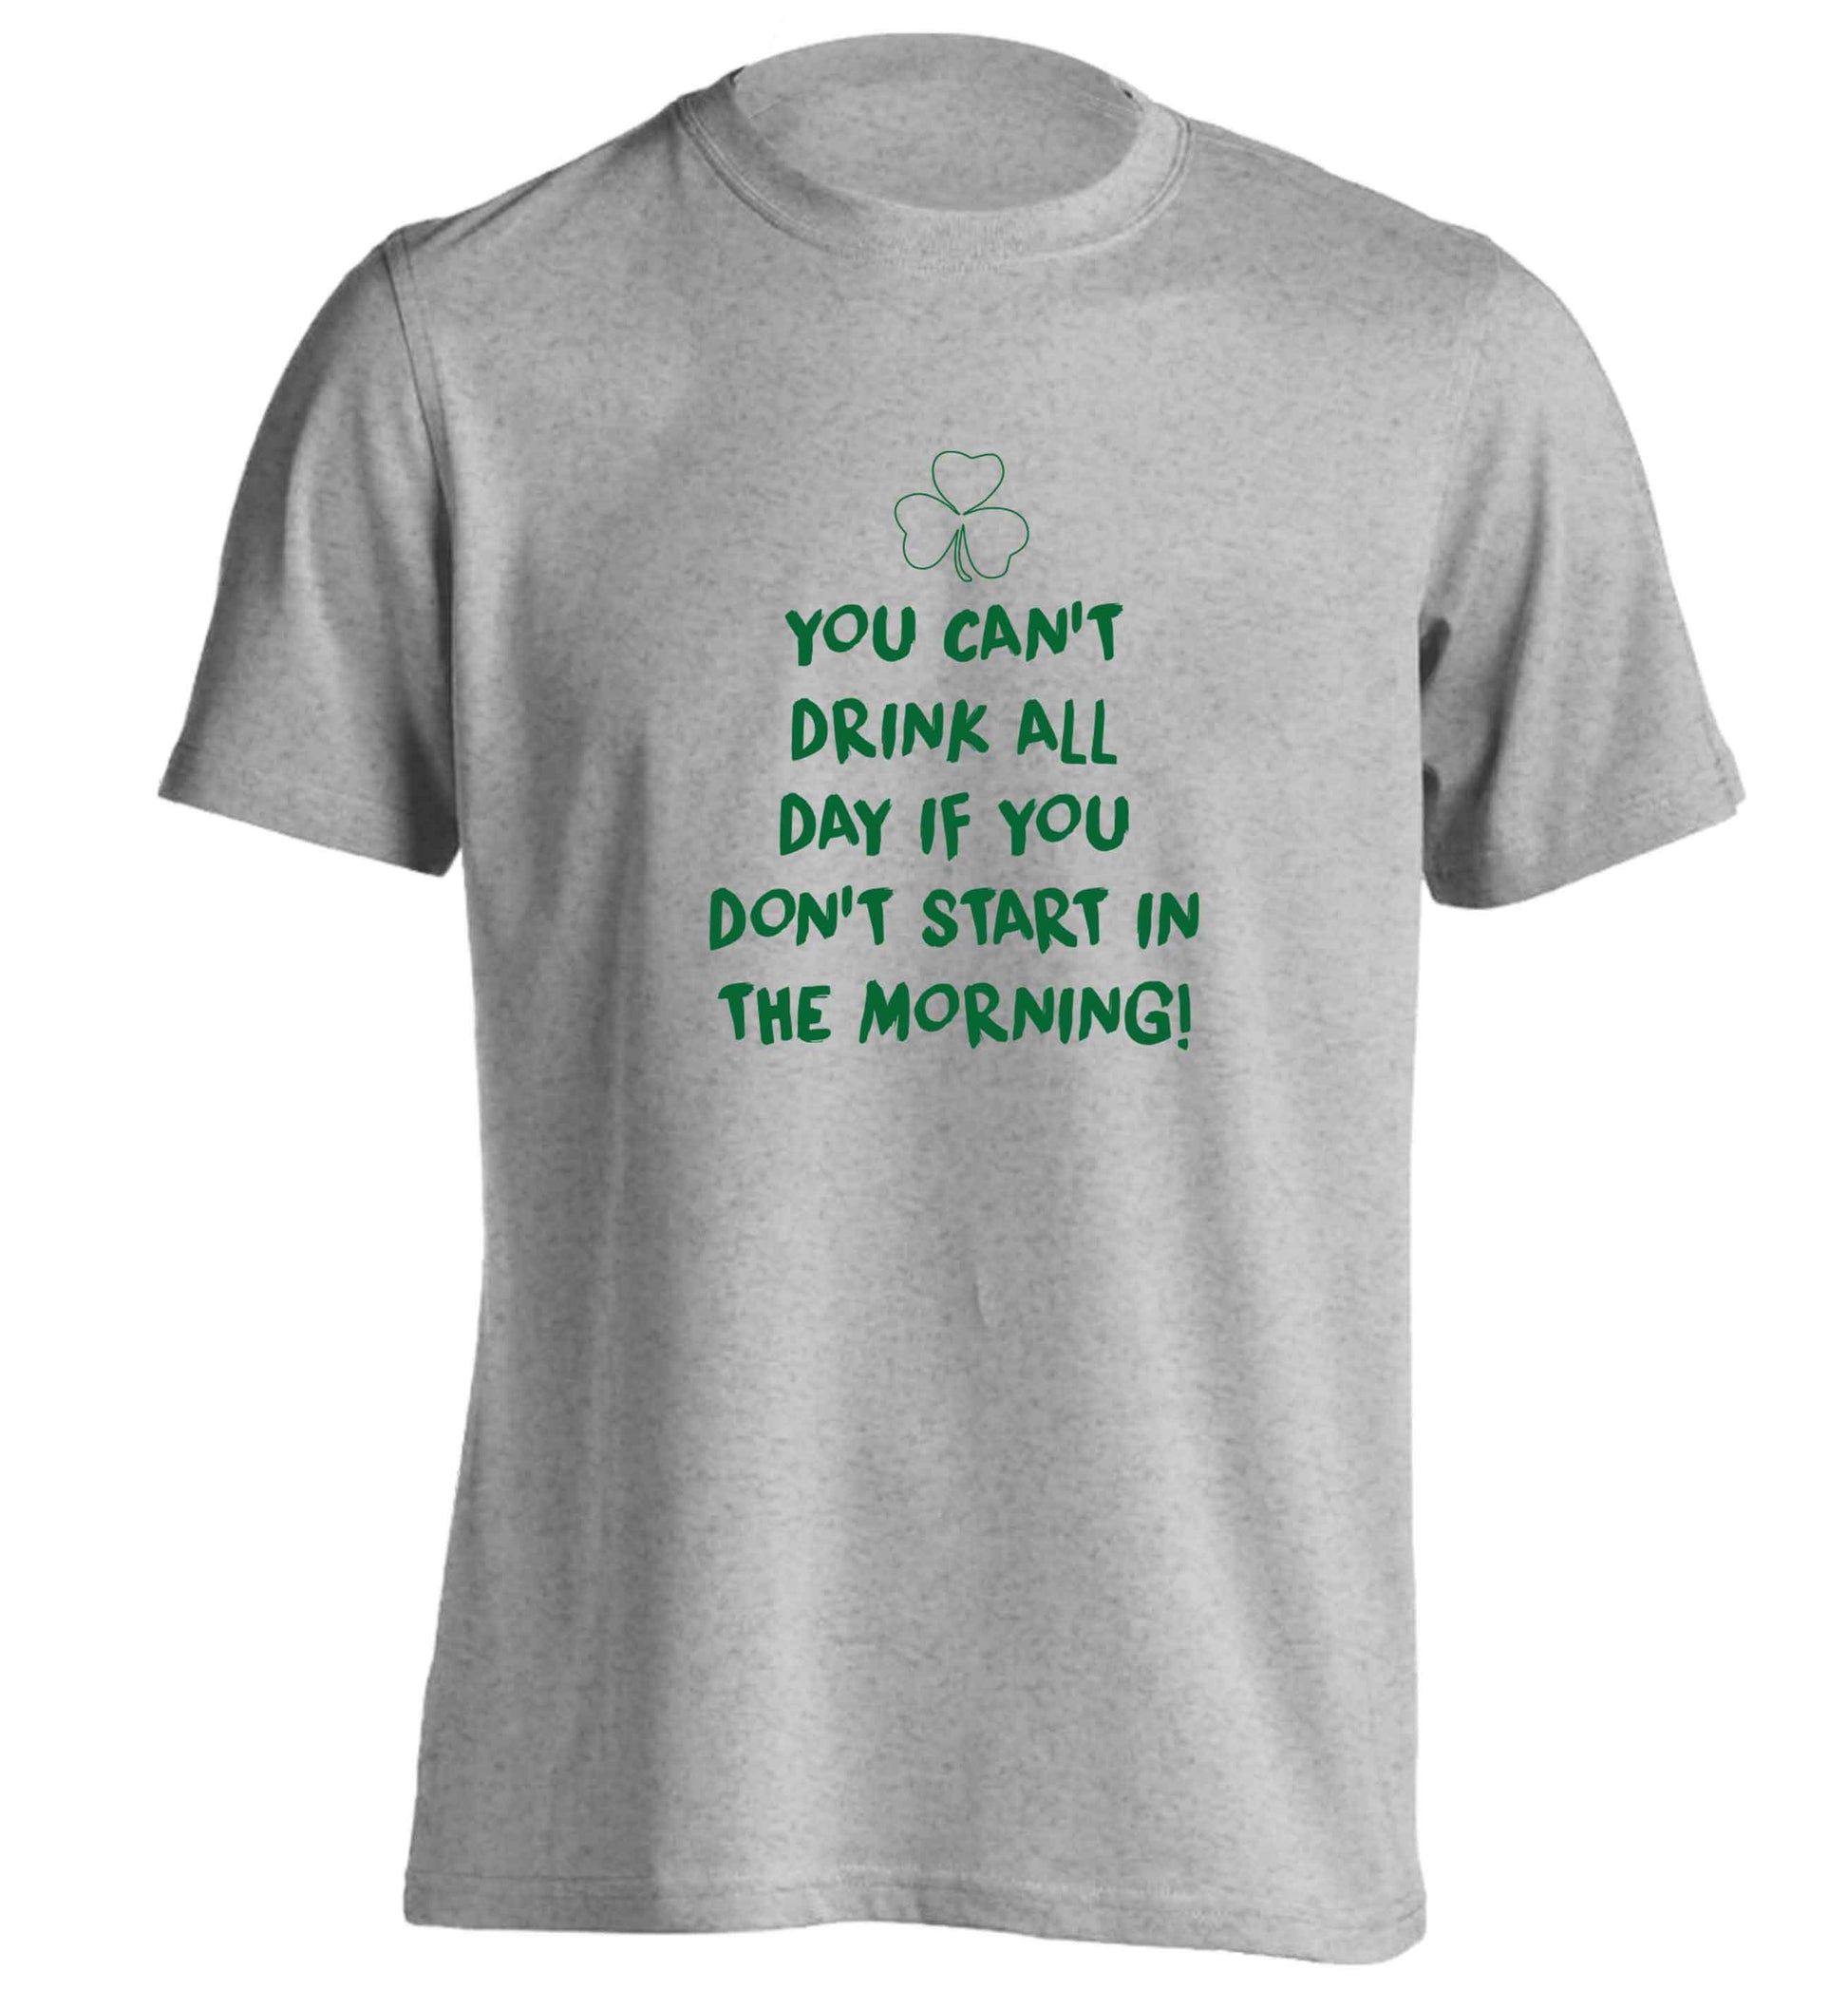 You can't drink all day if you don't start in the morning adults unisex grey Tshirt 2XL